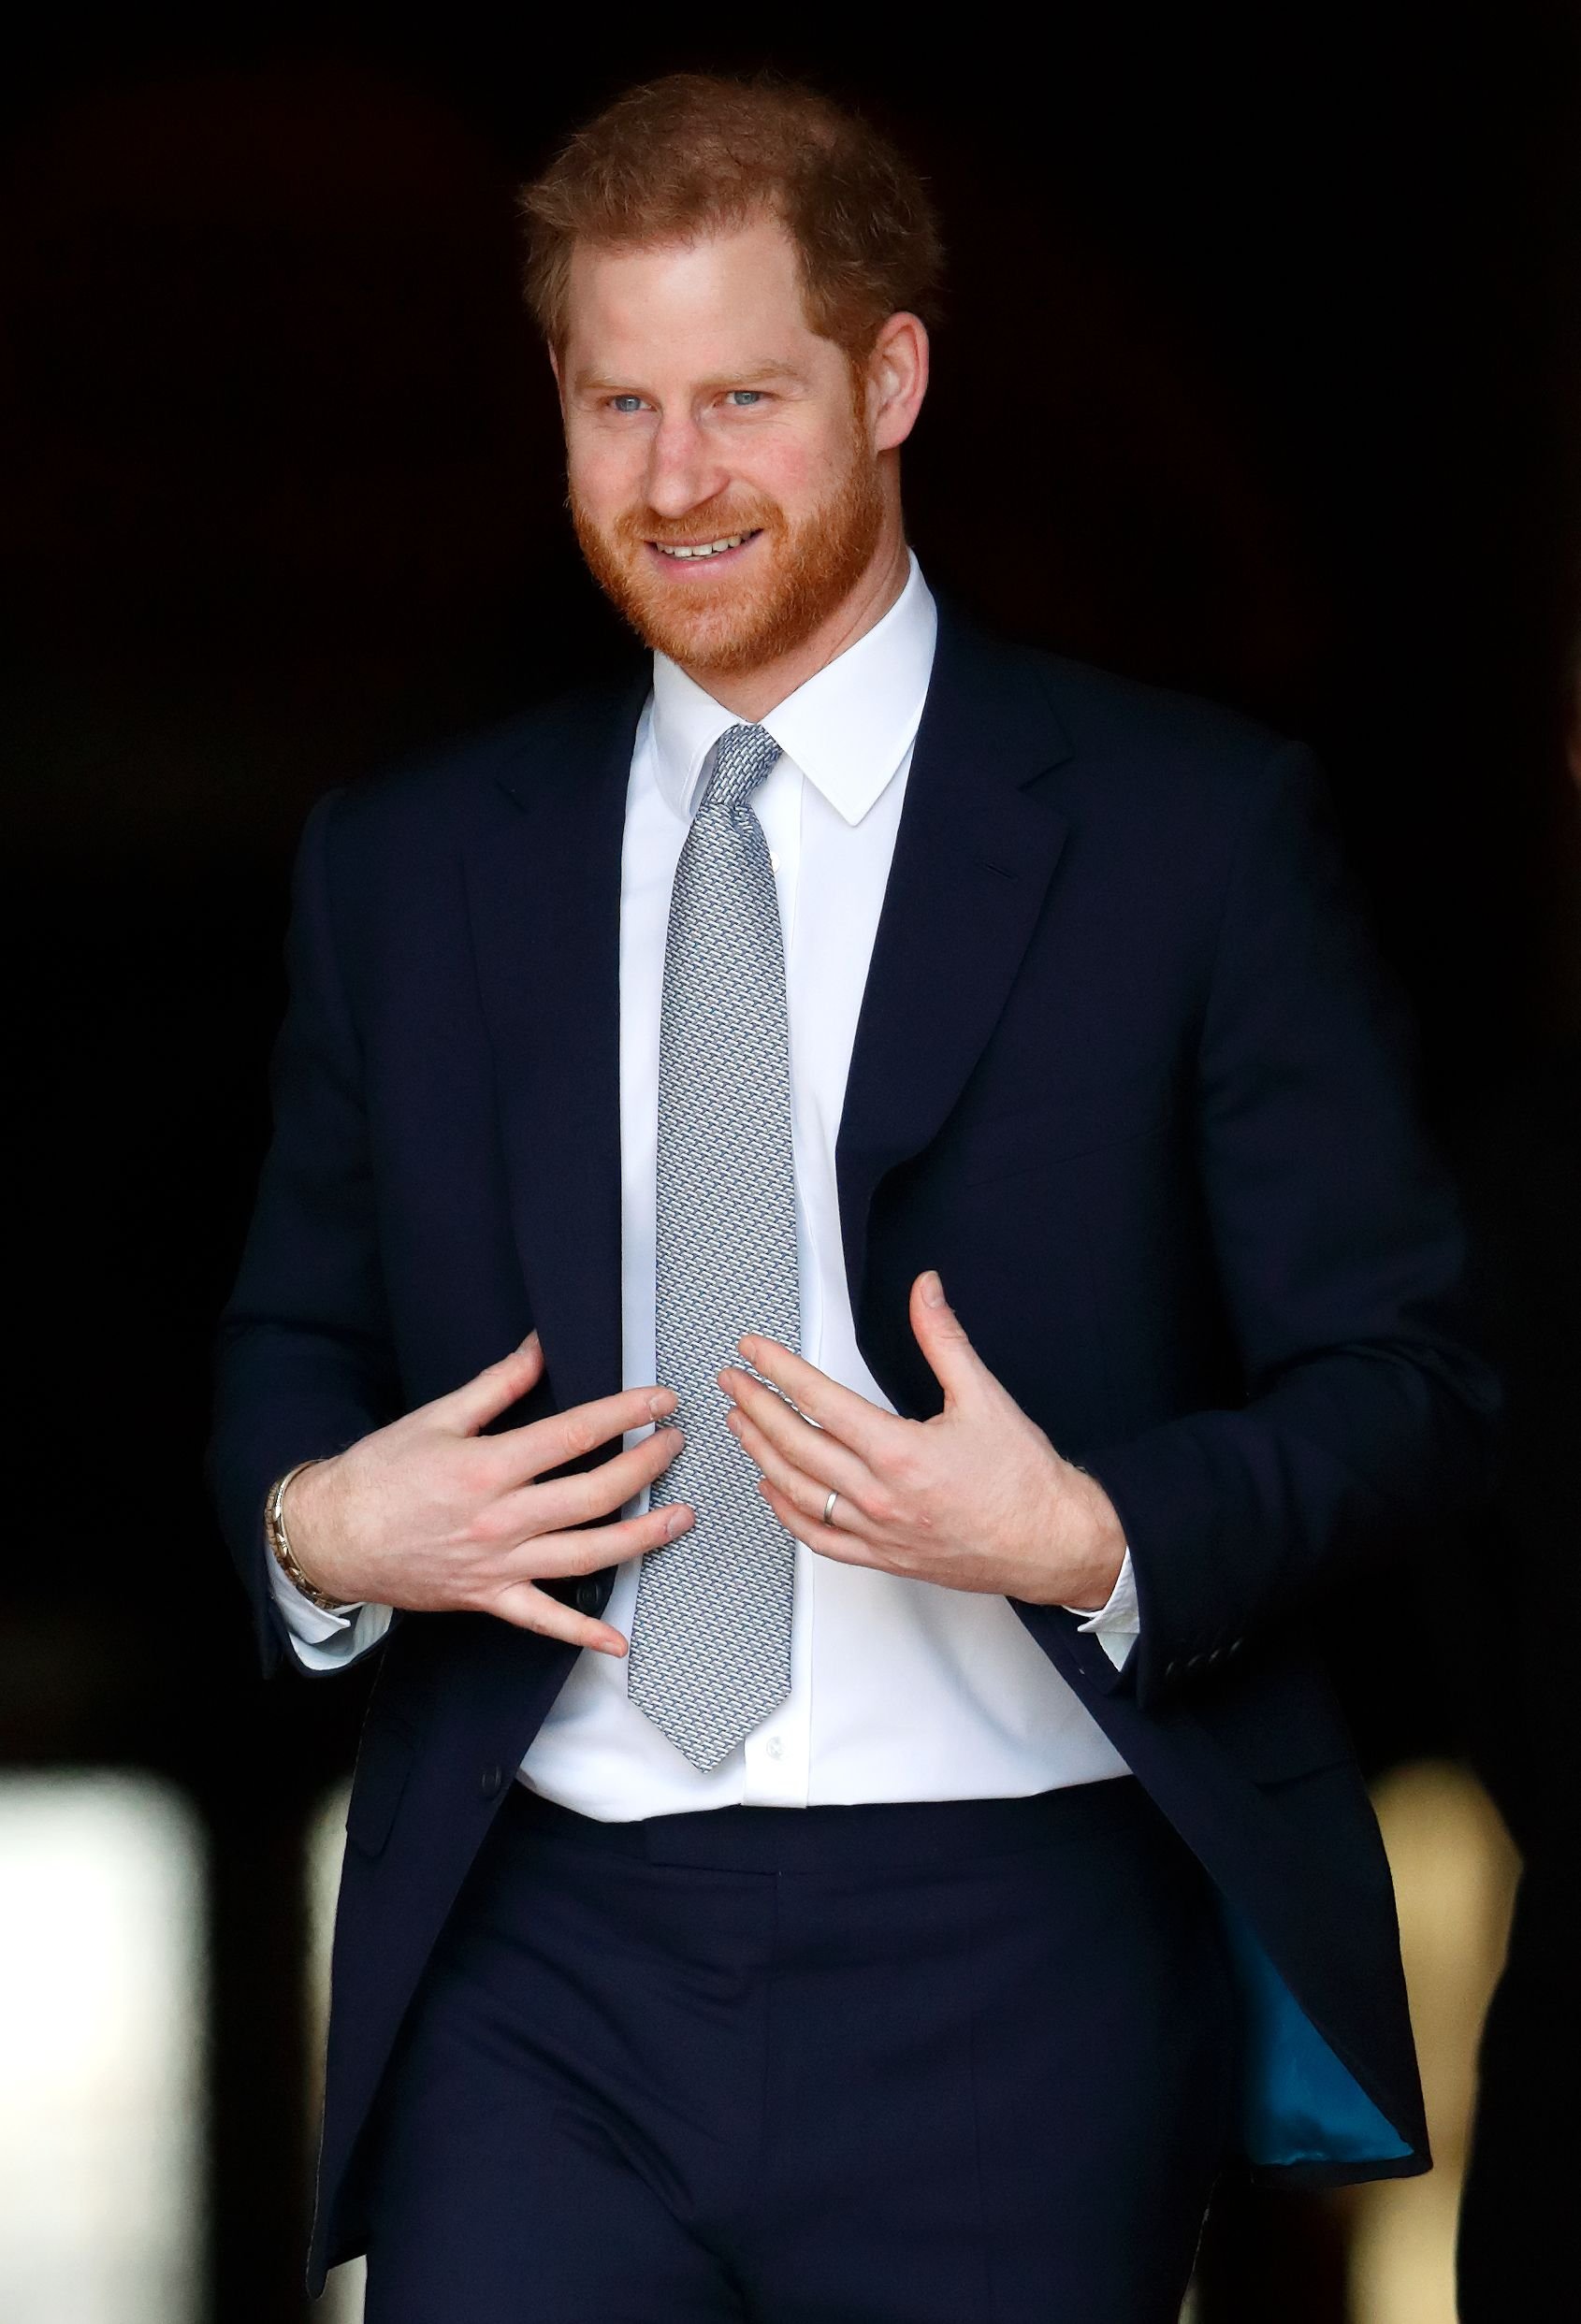 Prince Harry, Duke of Sussex hosts the Rugby League World Cup 2021 draws for the men's, women's and wheelchair tournaments at Buckingham Palace on January 16, 2020 | Getty Images